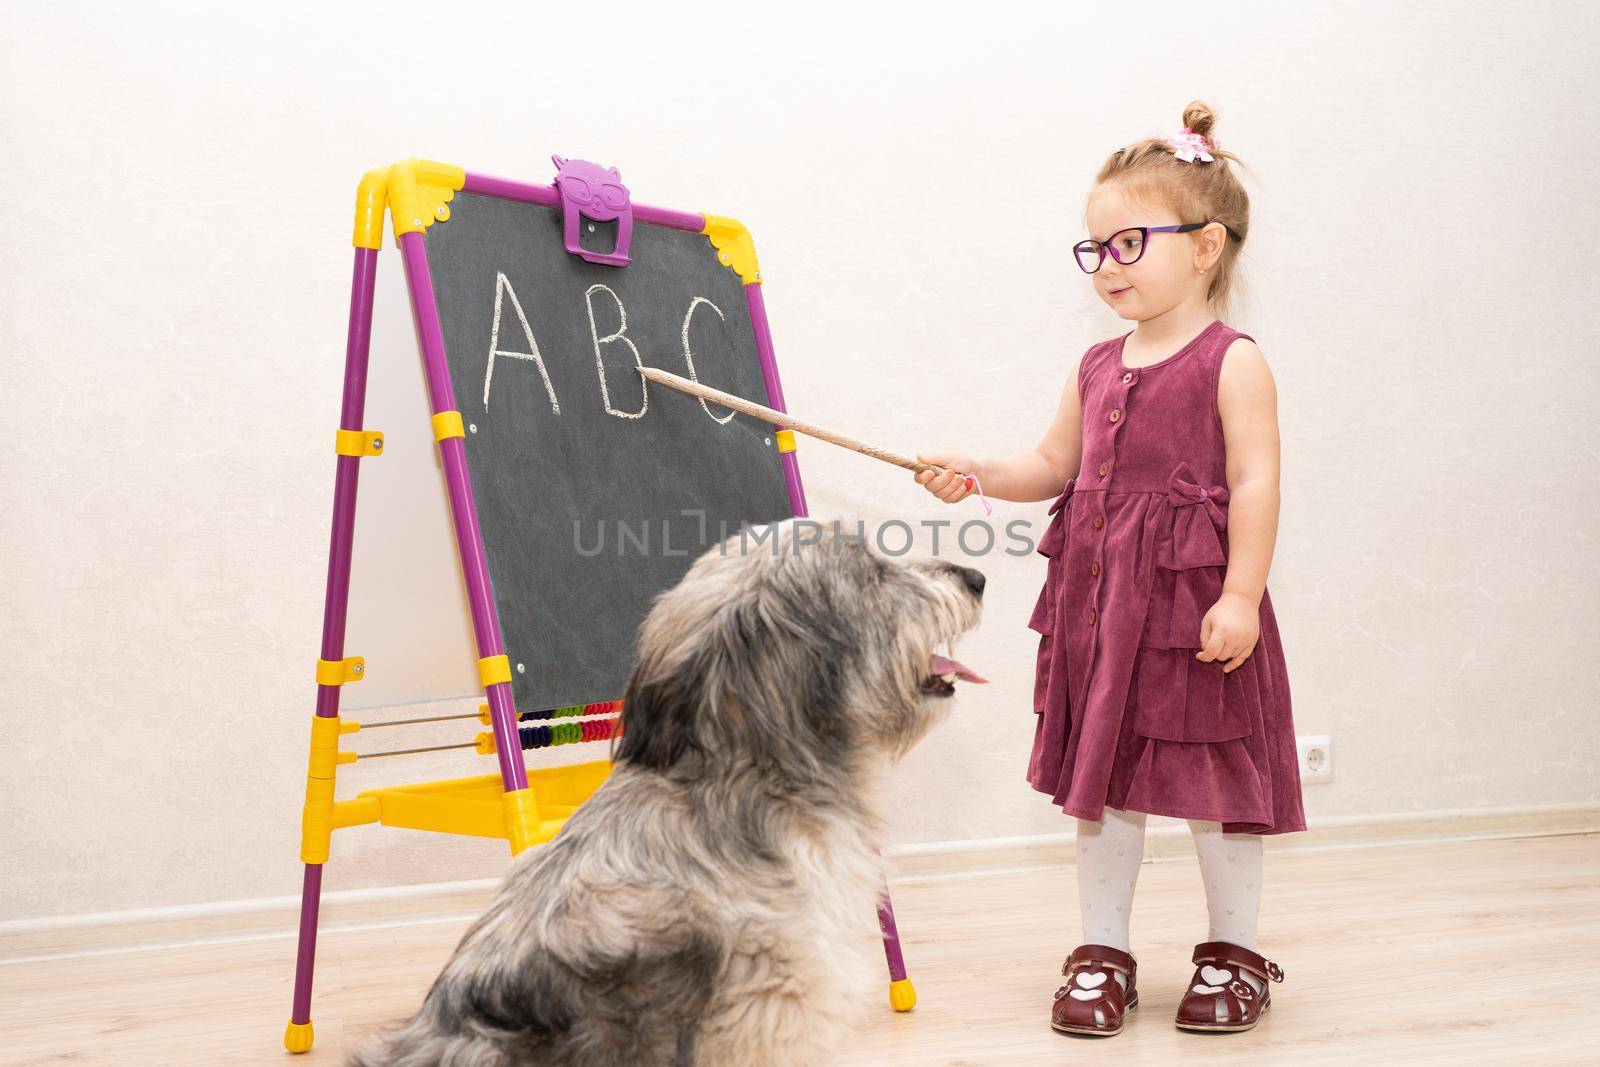 the girl shows the letter B with a pointer, written in chalk on the blackboard, to her beloved dog. She is learning the alphabet with her pet. the dog looks attentively at his mistress